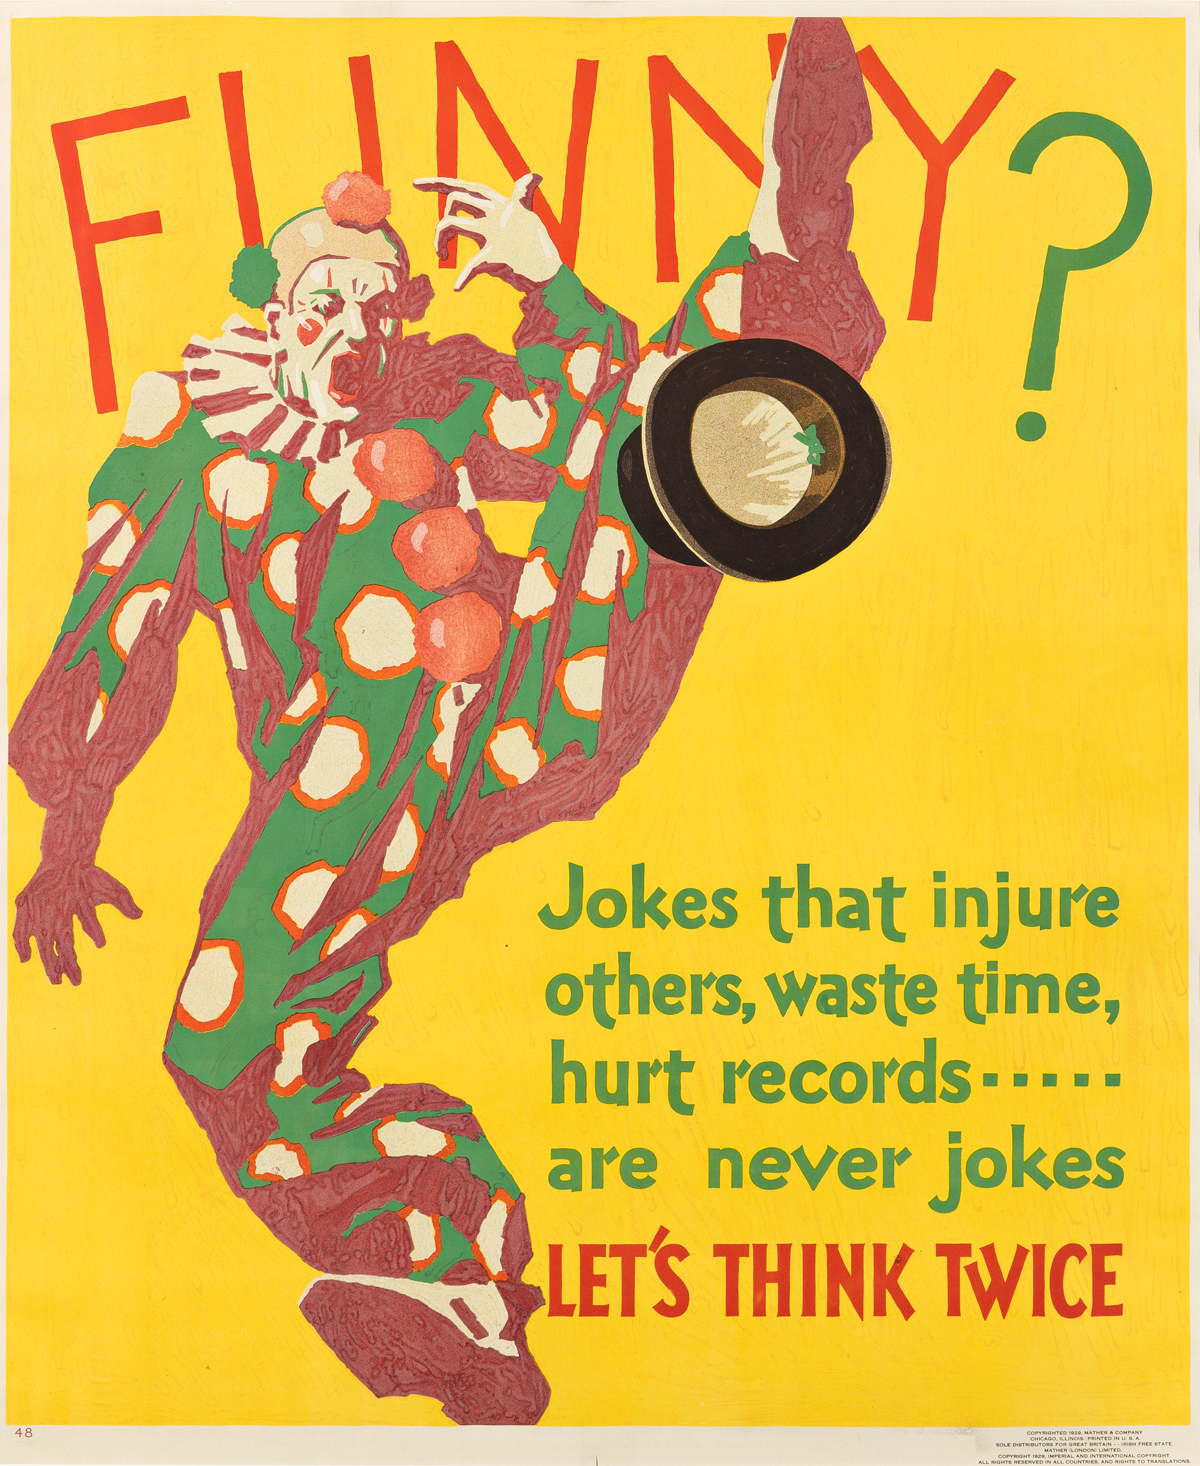 DESIGNER UNKNOWN.  FUNNY? / LETS THINK TWICE. 1929. 43¾x35¾ inches, 111x90¾ cm. Mather & Company, Chicago.